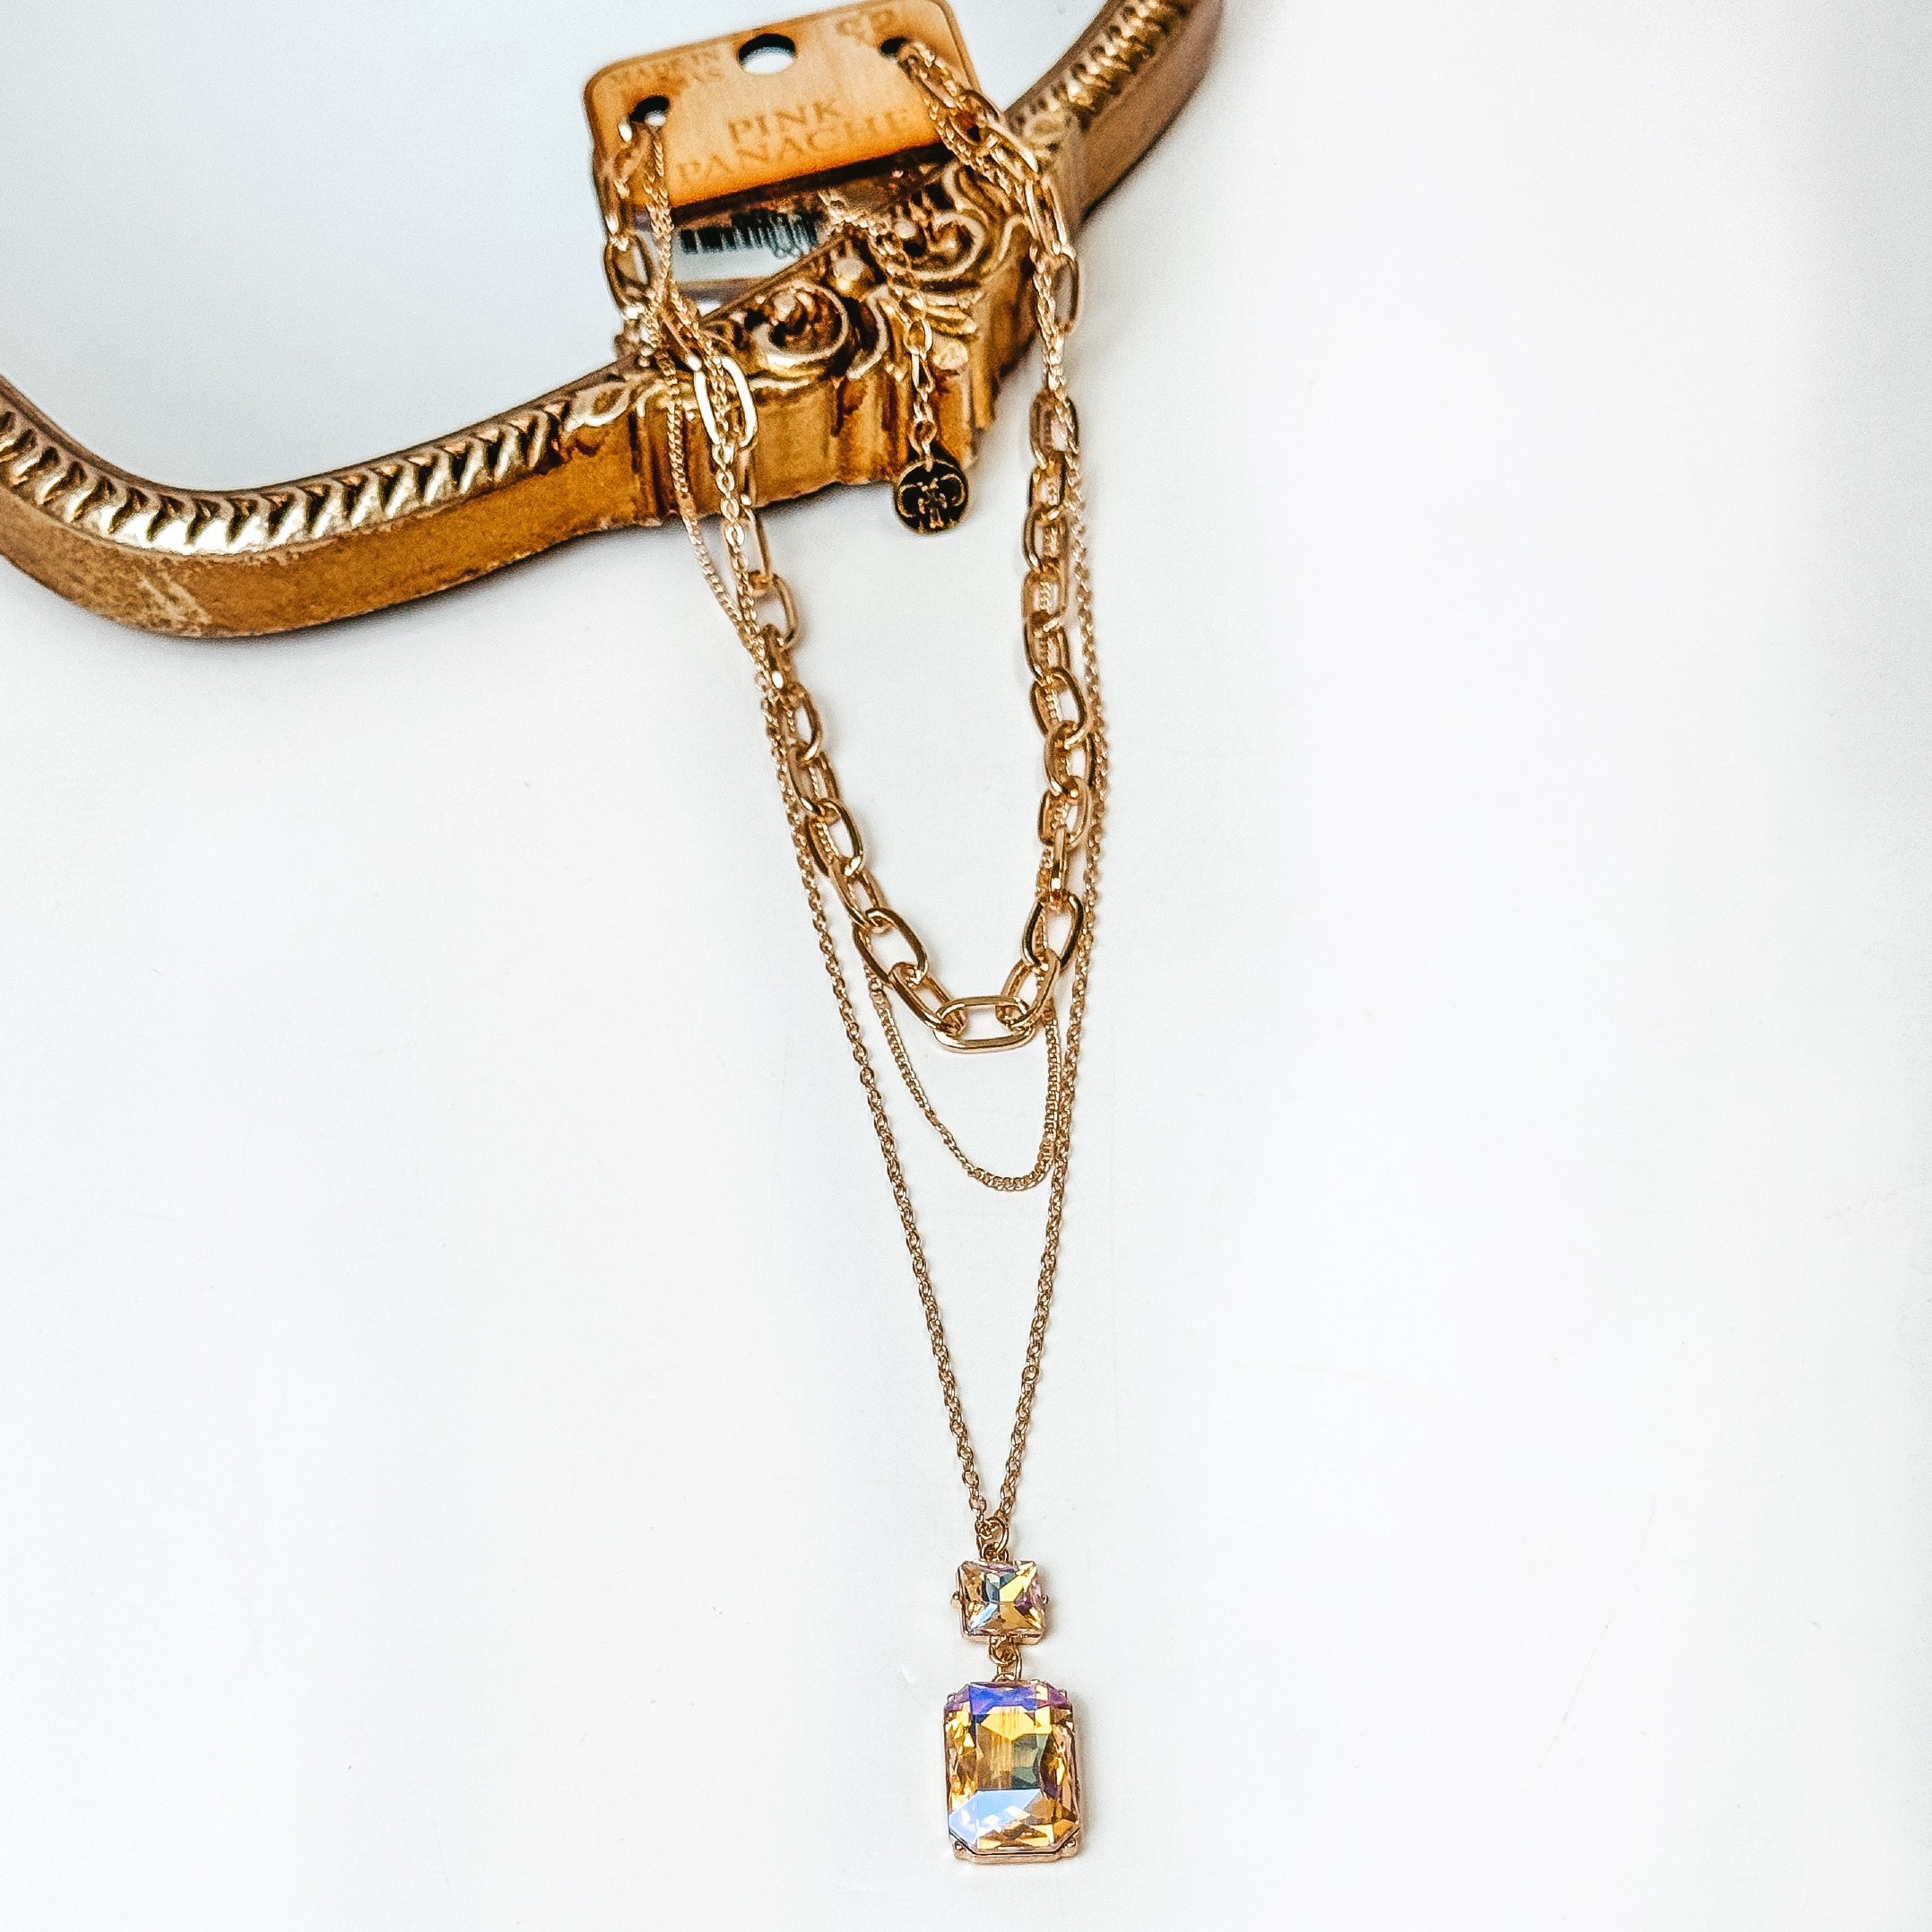 Pink Panache | 3 Strand Gold Tone Chain Necklace with Rose AB Square and Rectangle Pendant - Giddy Up Glamour Boutique